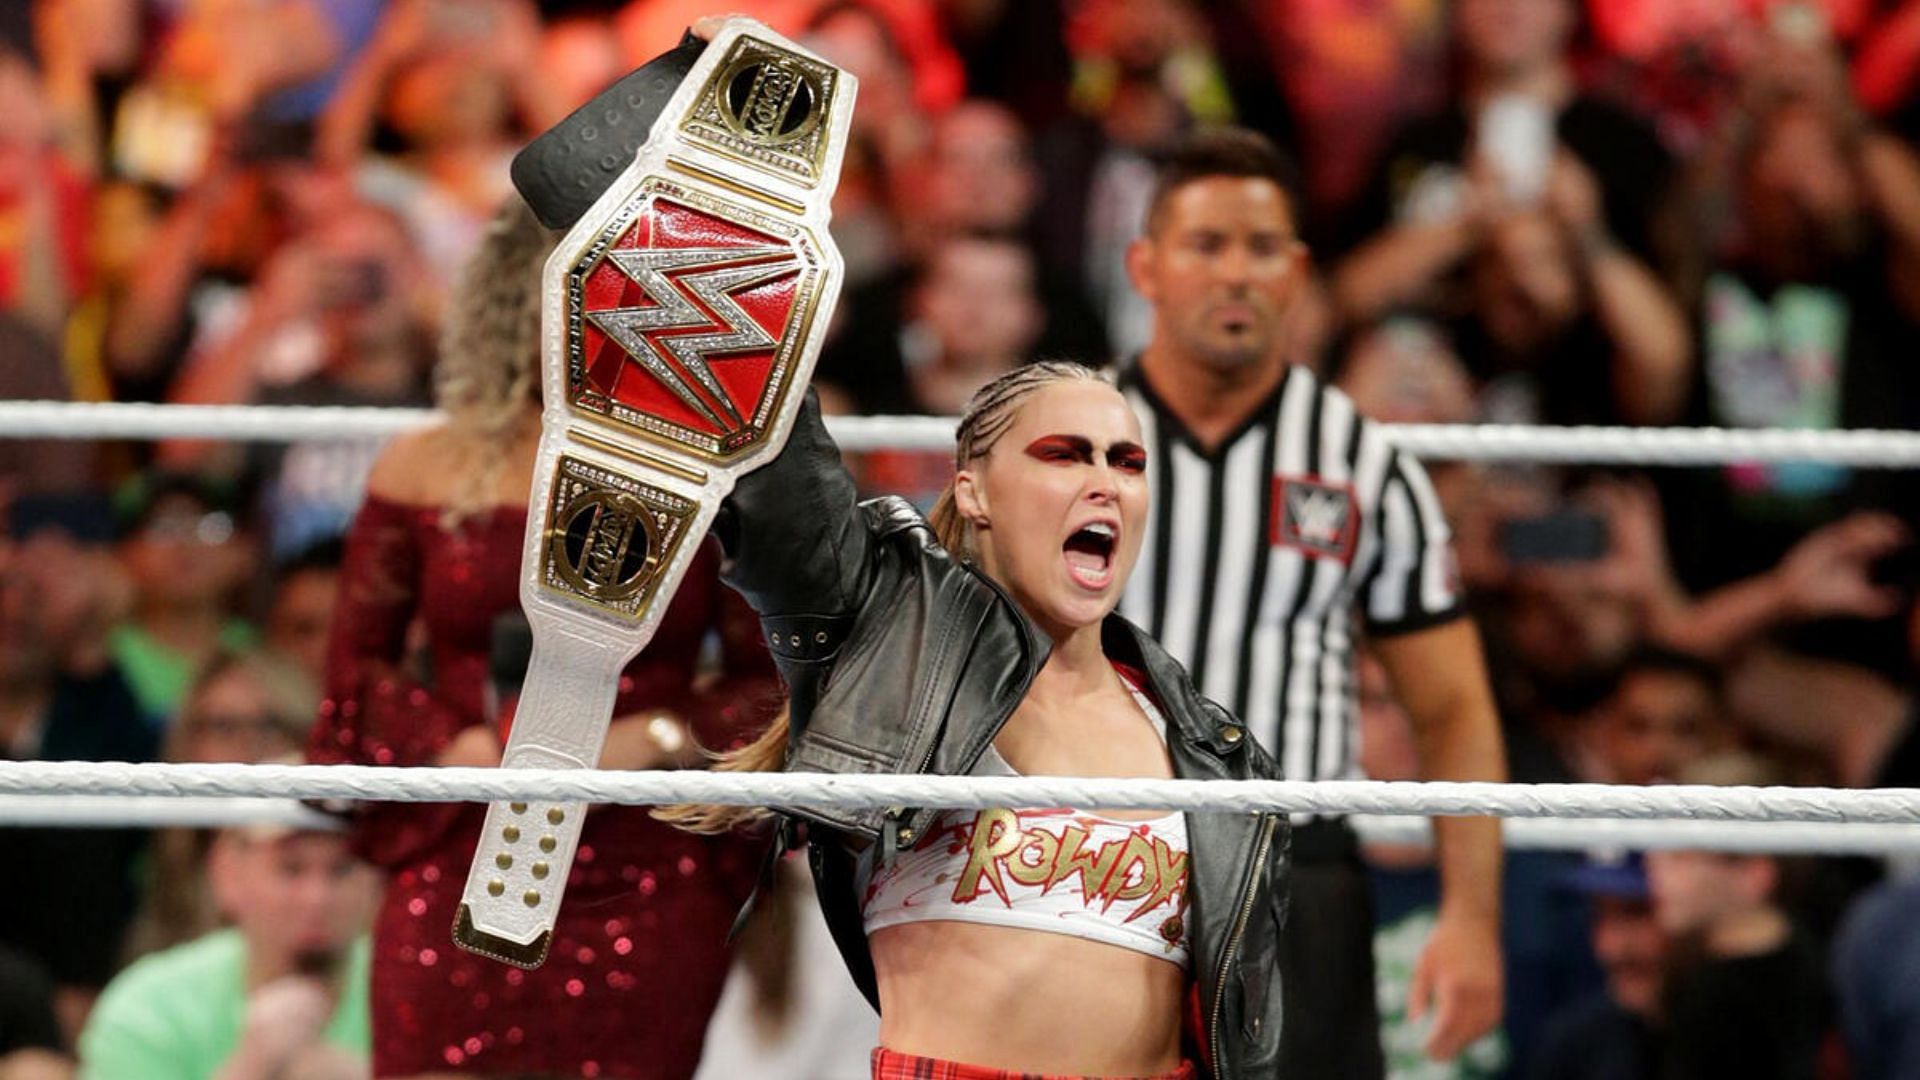 Ronda Rousey had quite the run in WWE